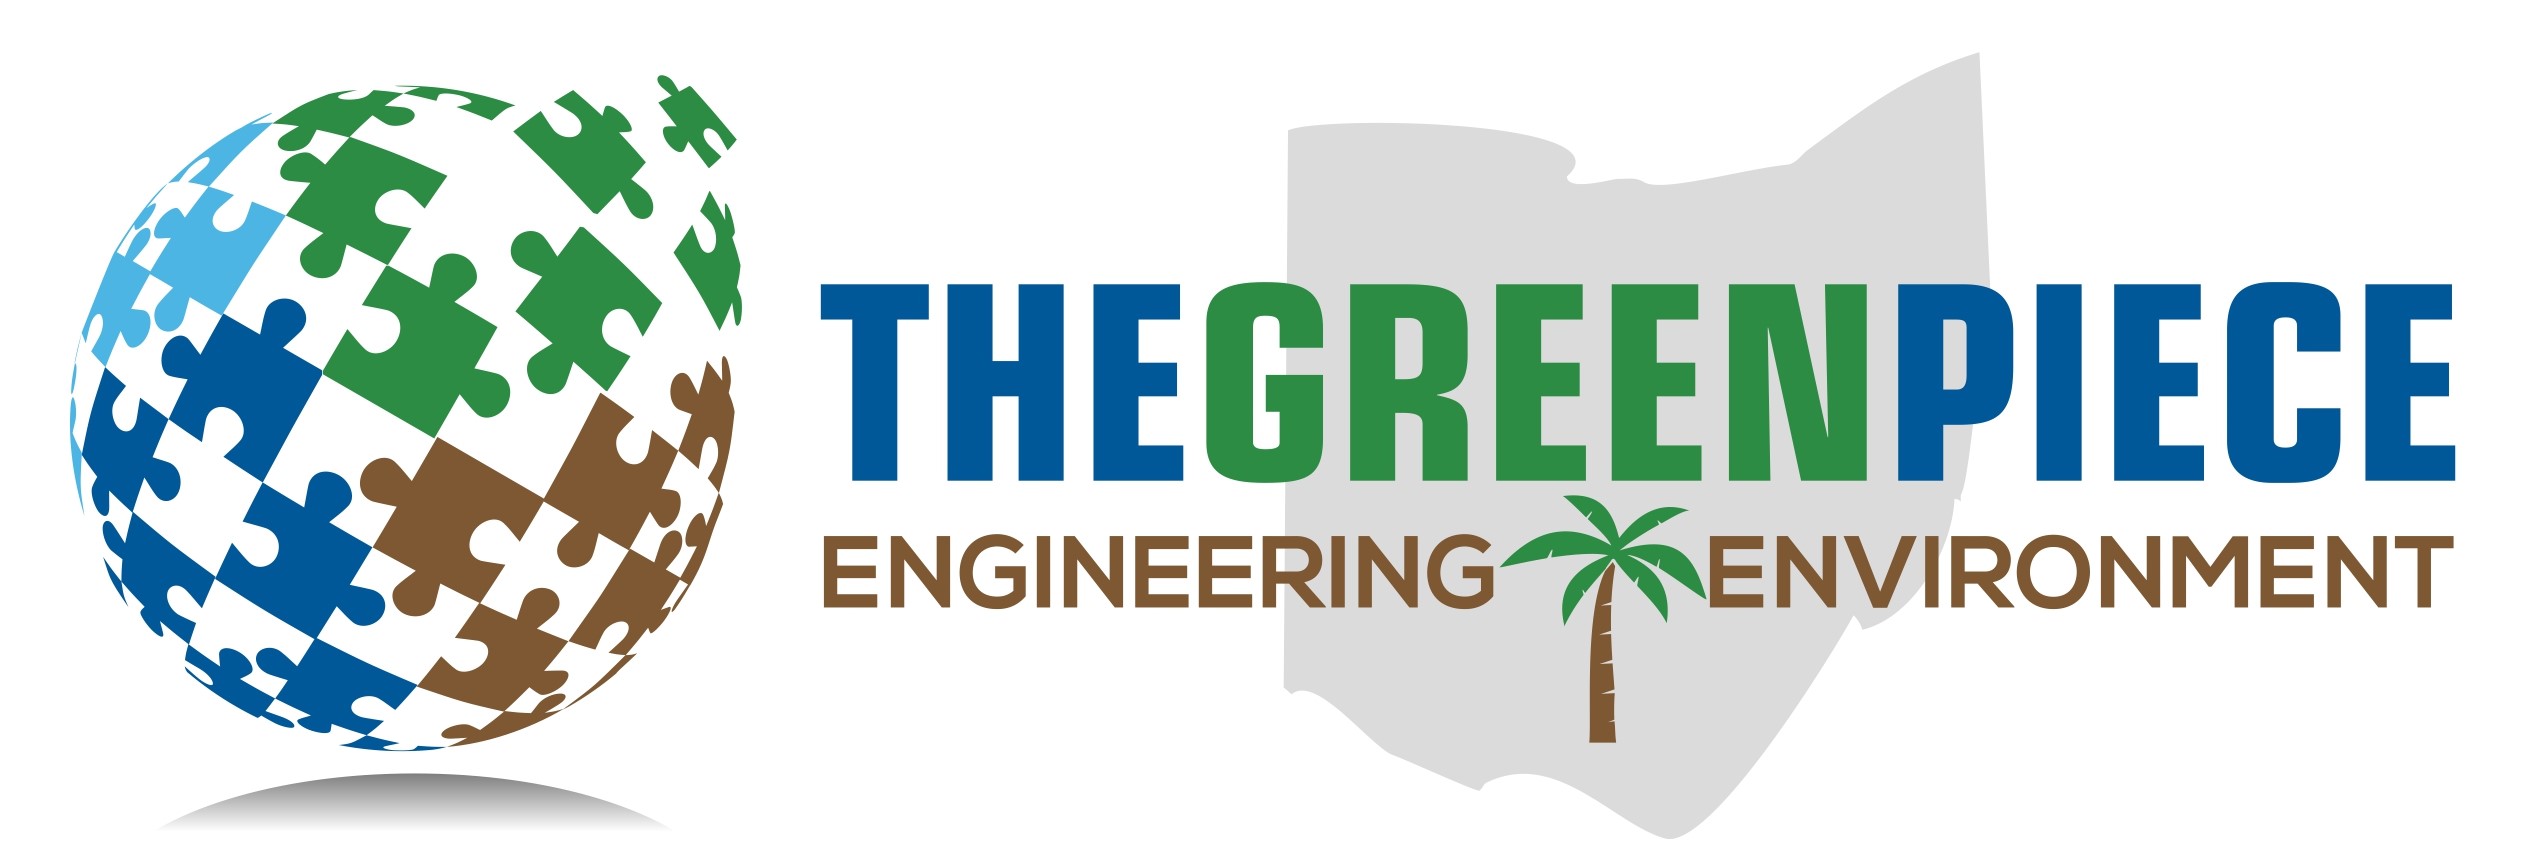 The Green Piece Engineering + Environment CLIPPED